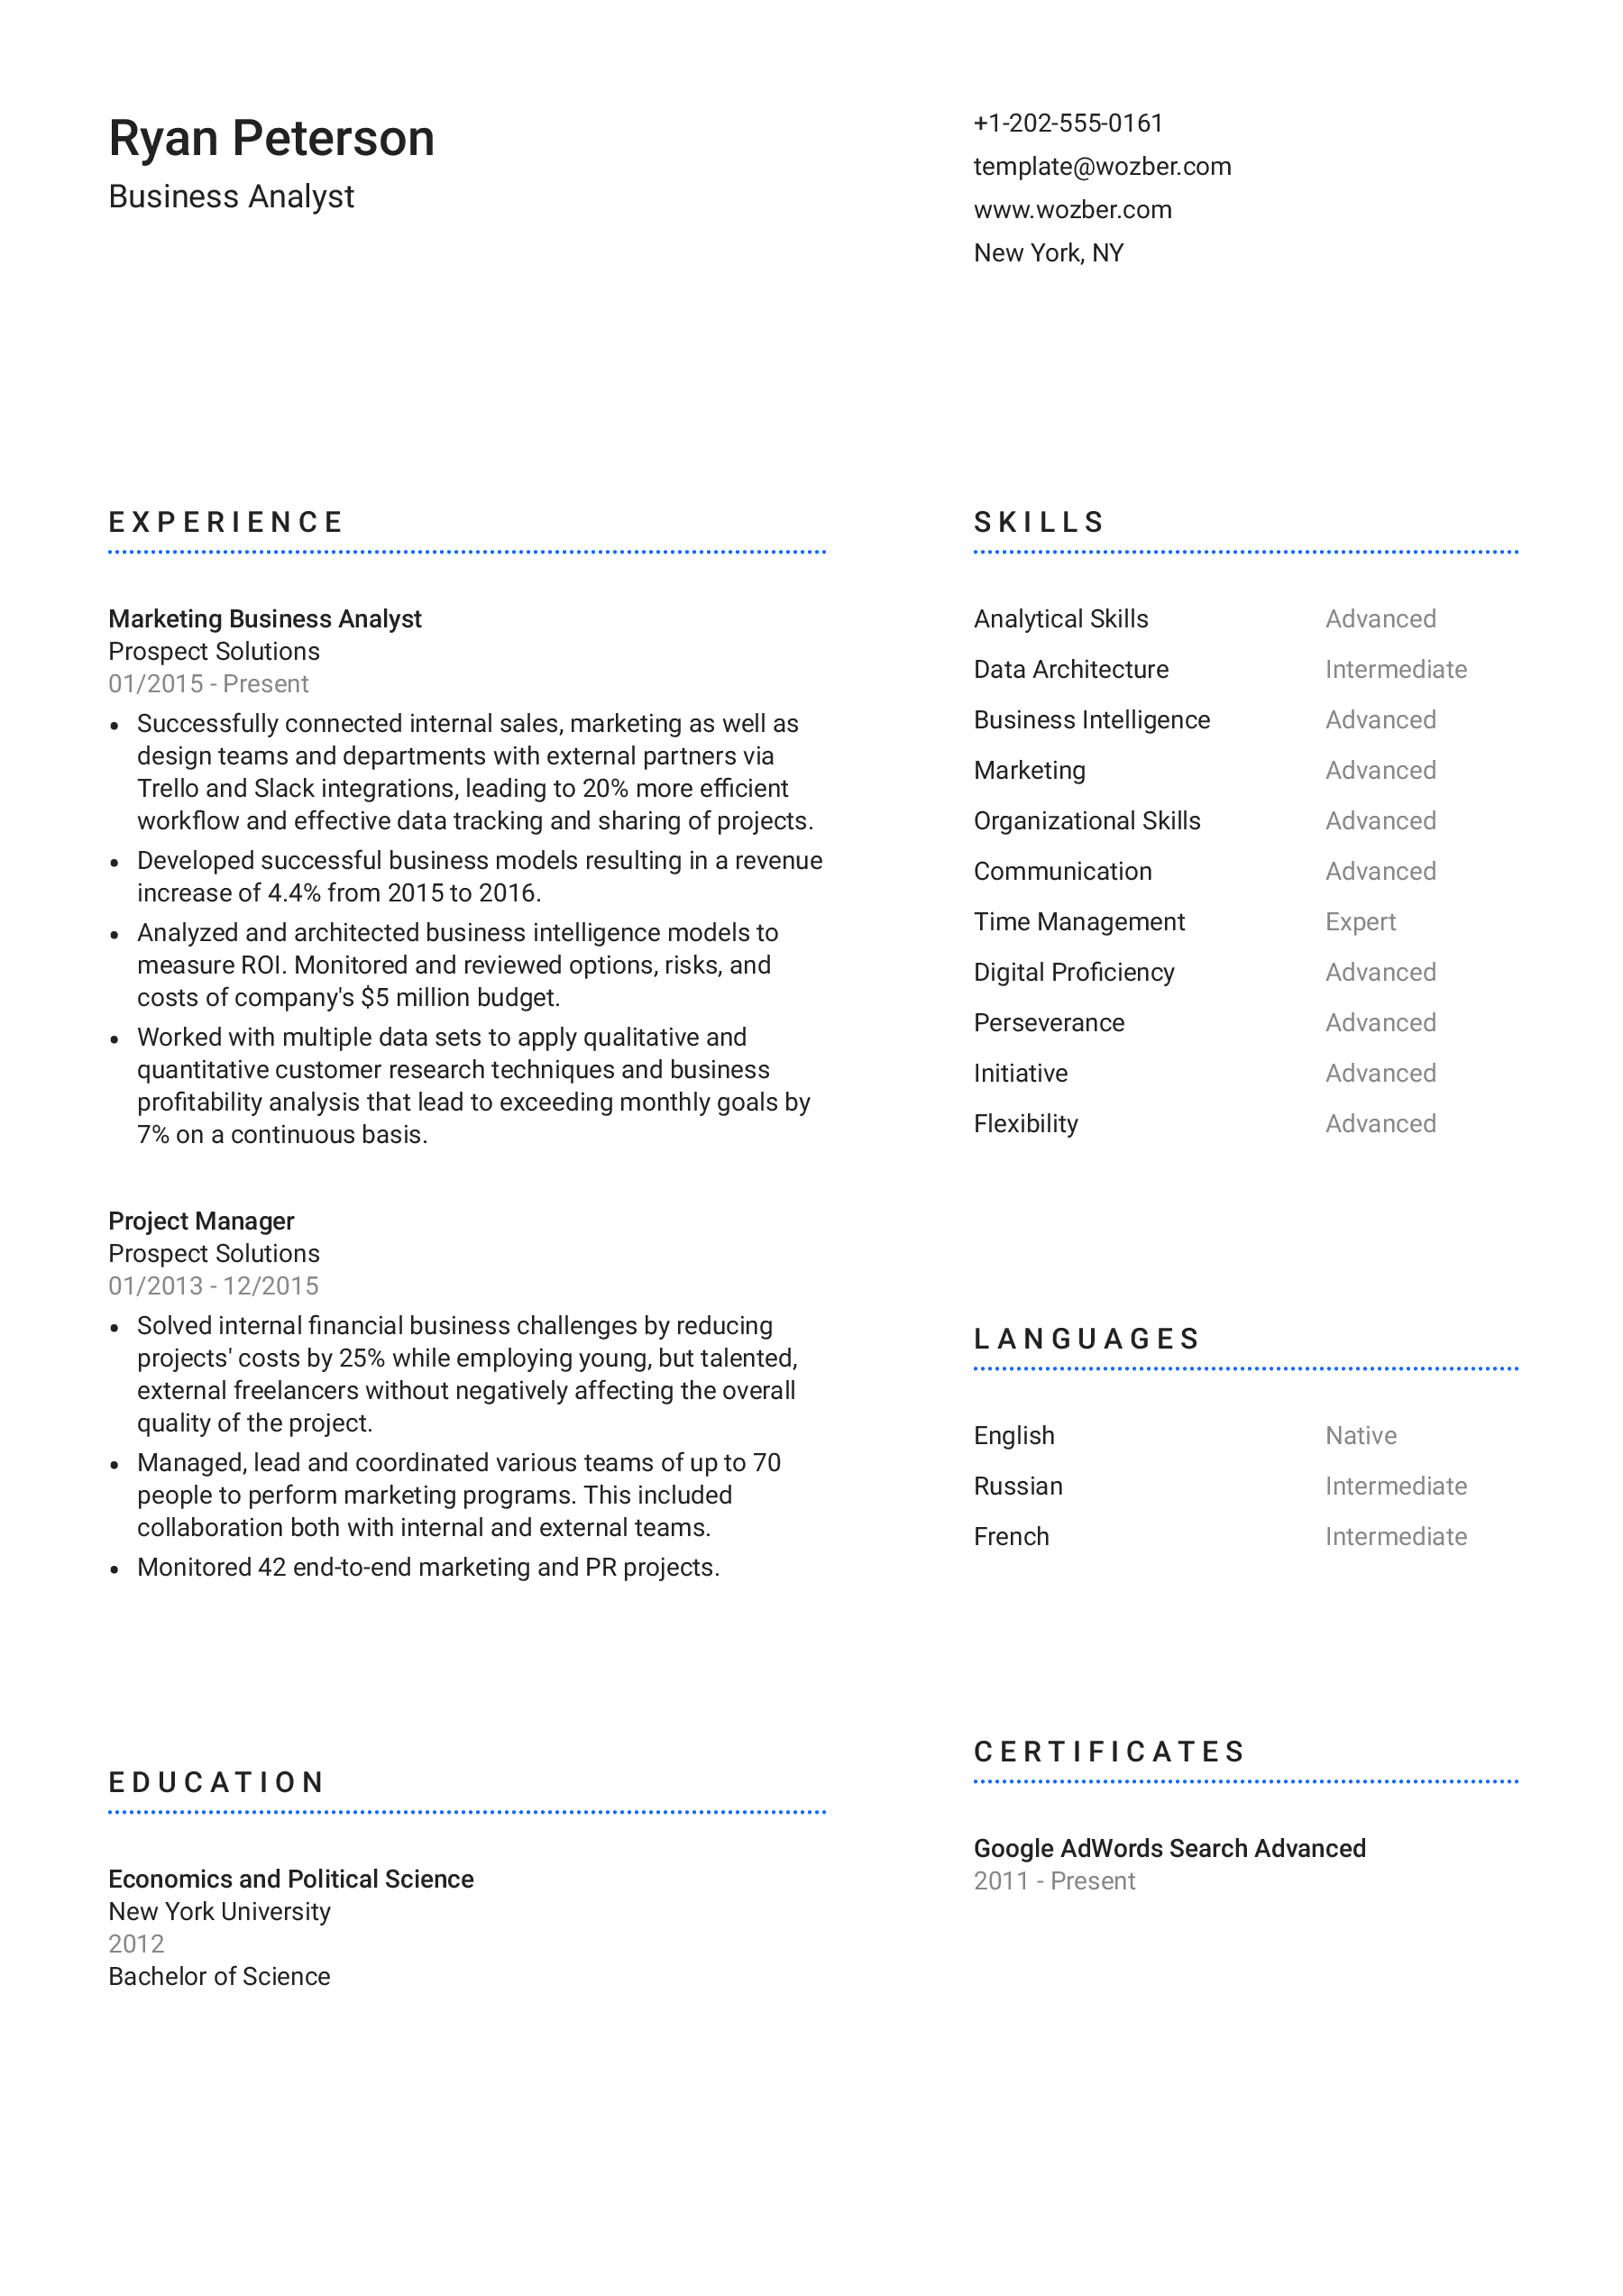 A professional resume template with a solid-looking design.